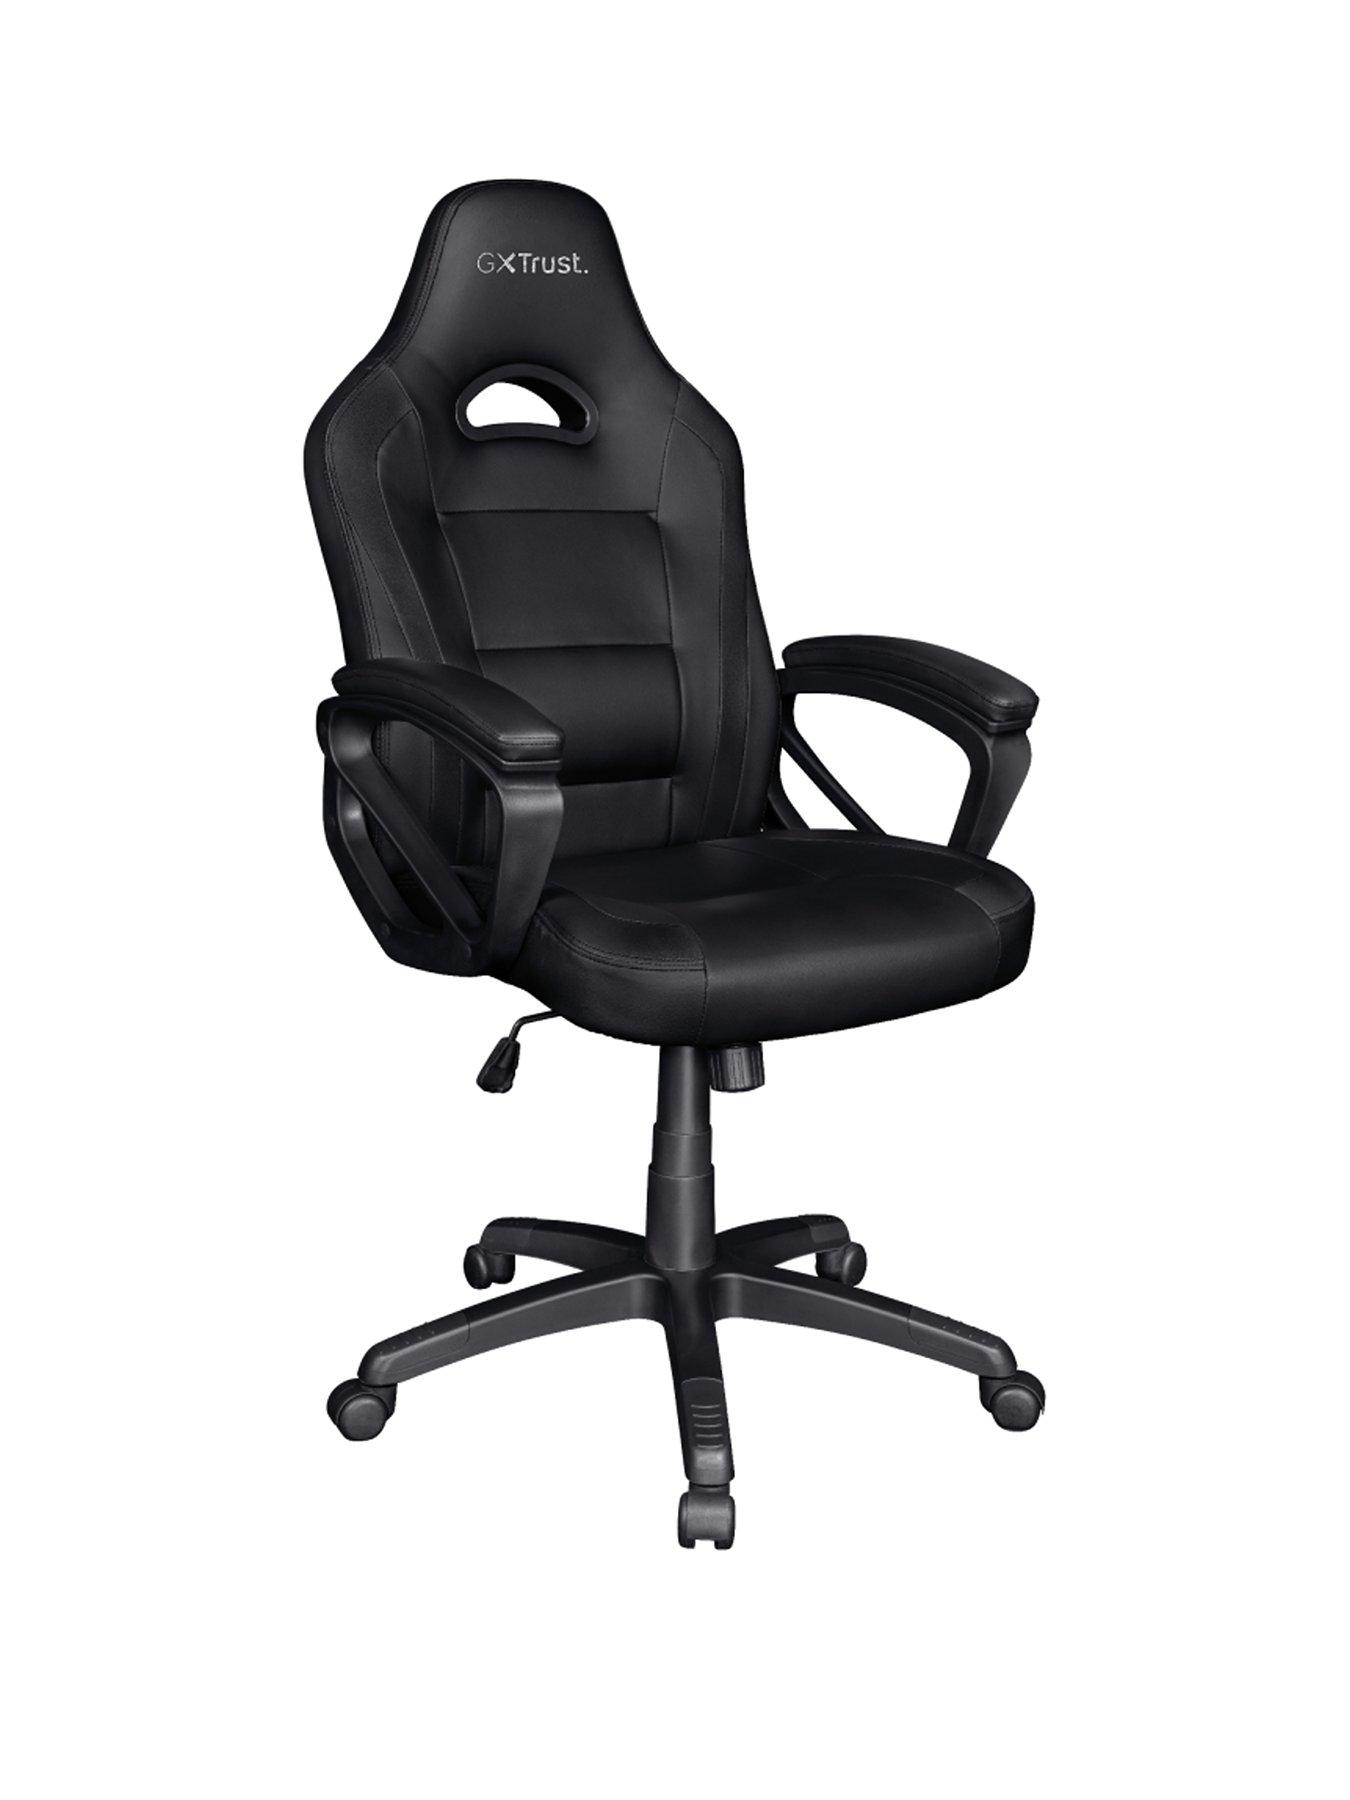 Xbox One | Gaming Chairs | Gaming & Dvd | Www.Very.Co.Uk